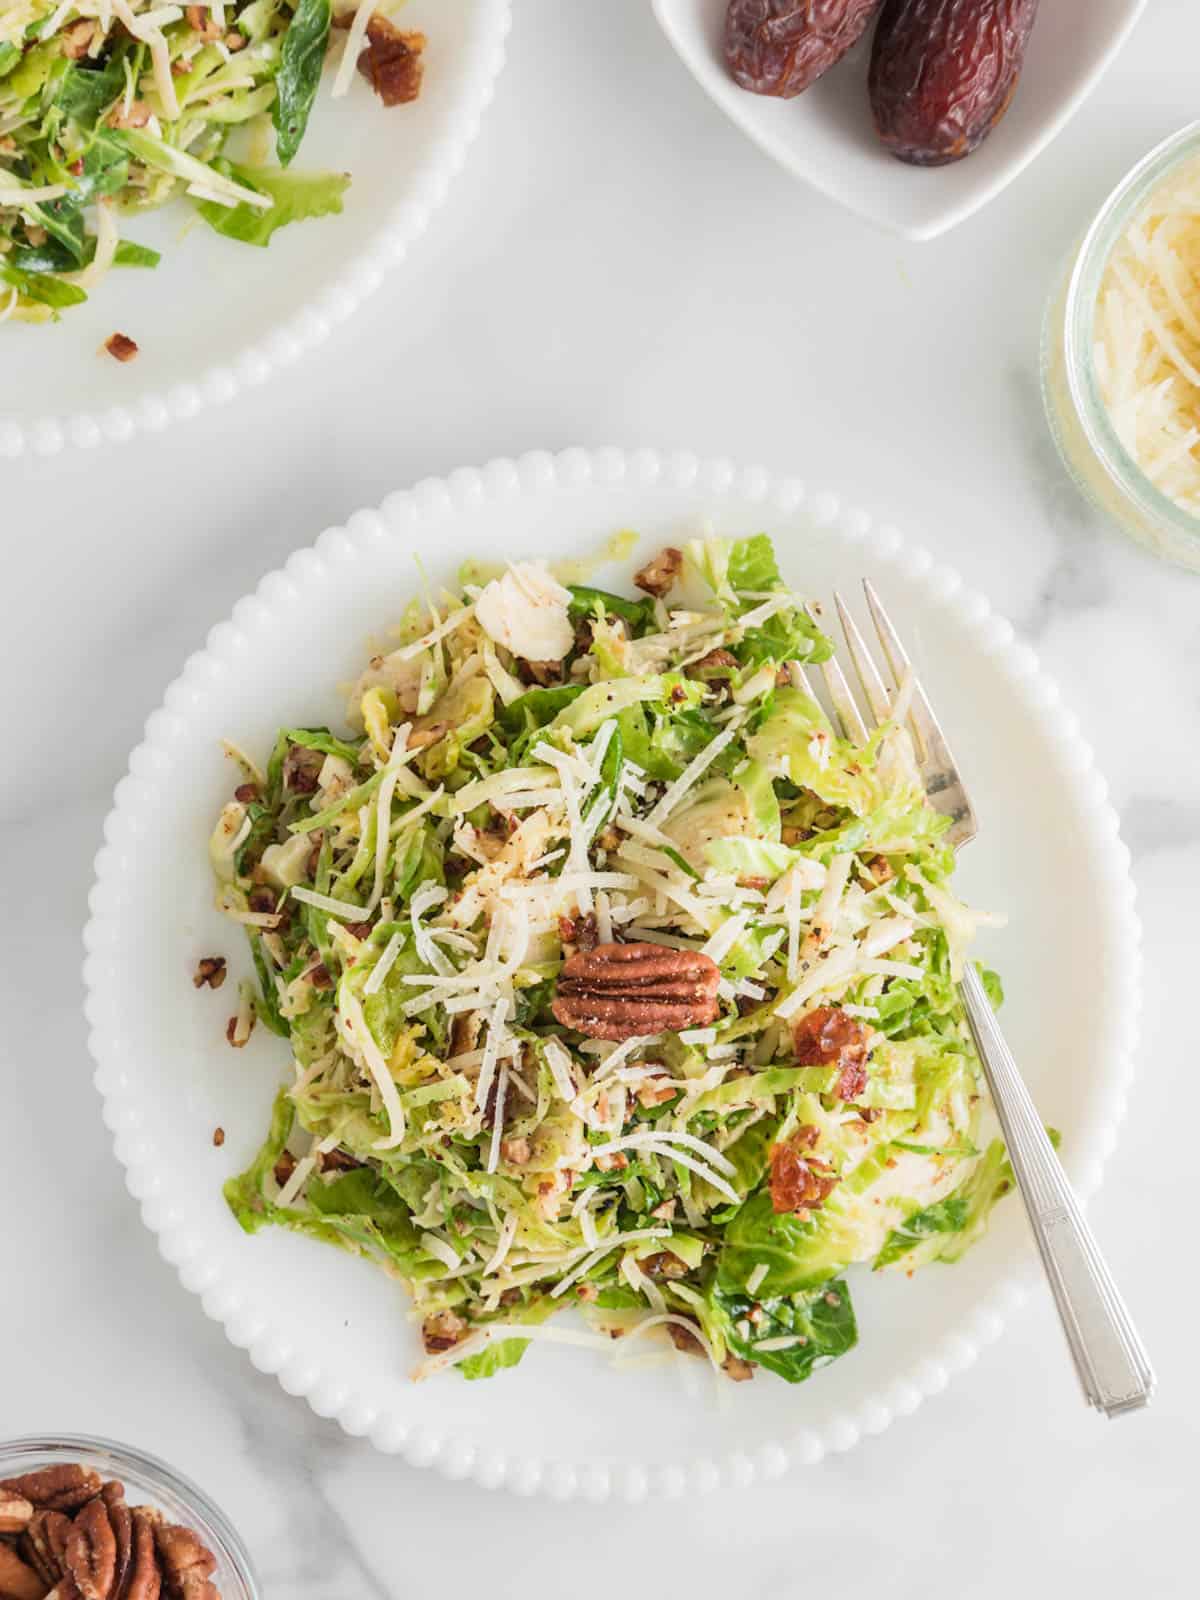 Plated serving of shredded Brussels sprouts salad with parmesan and mustard vinaigrette.